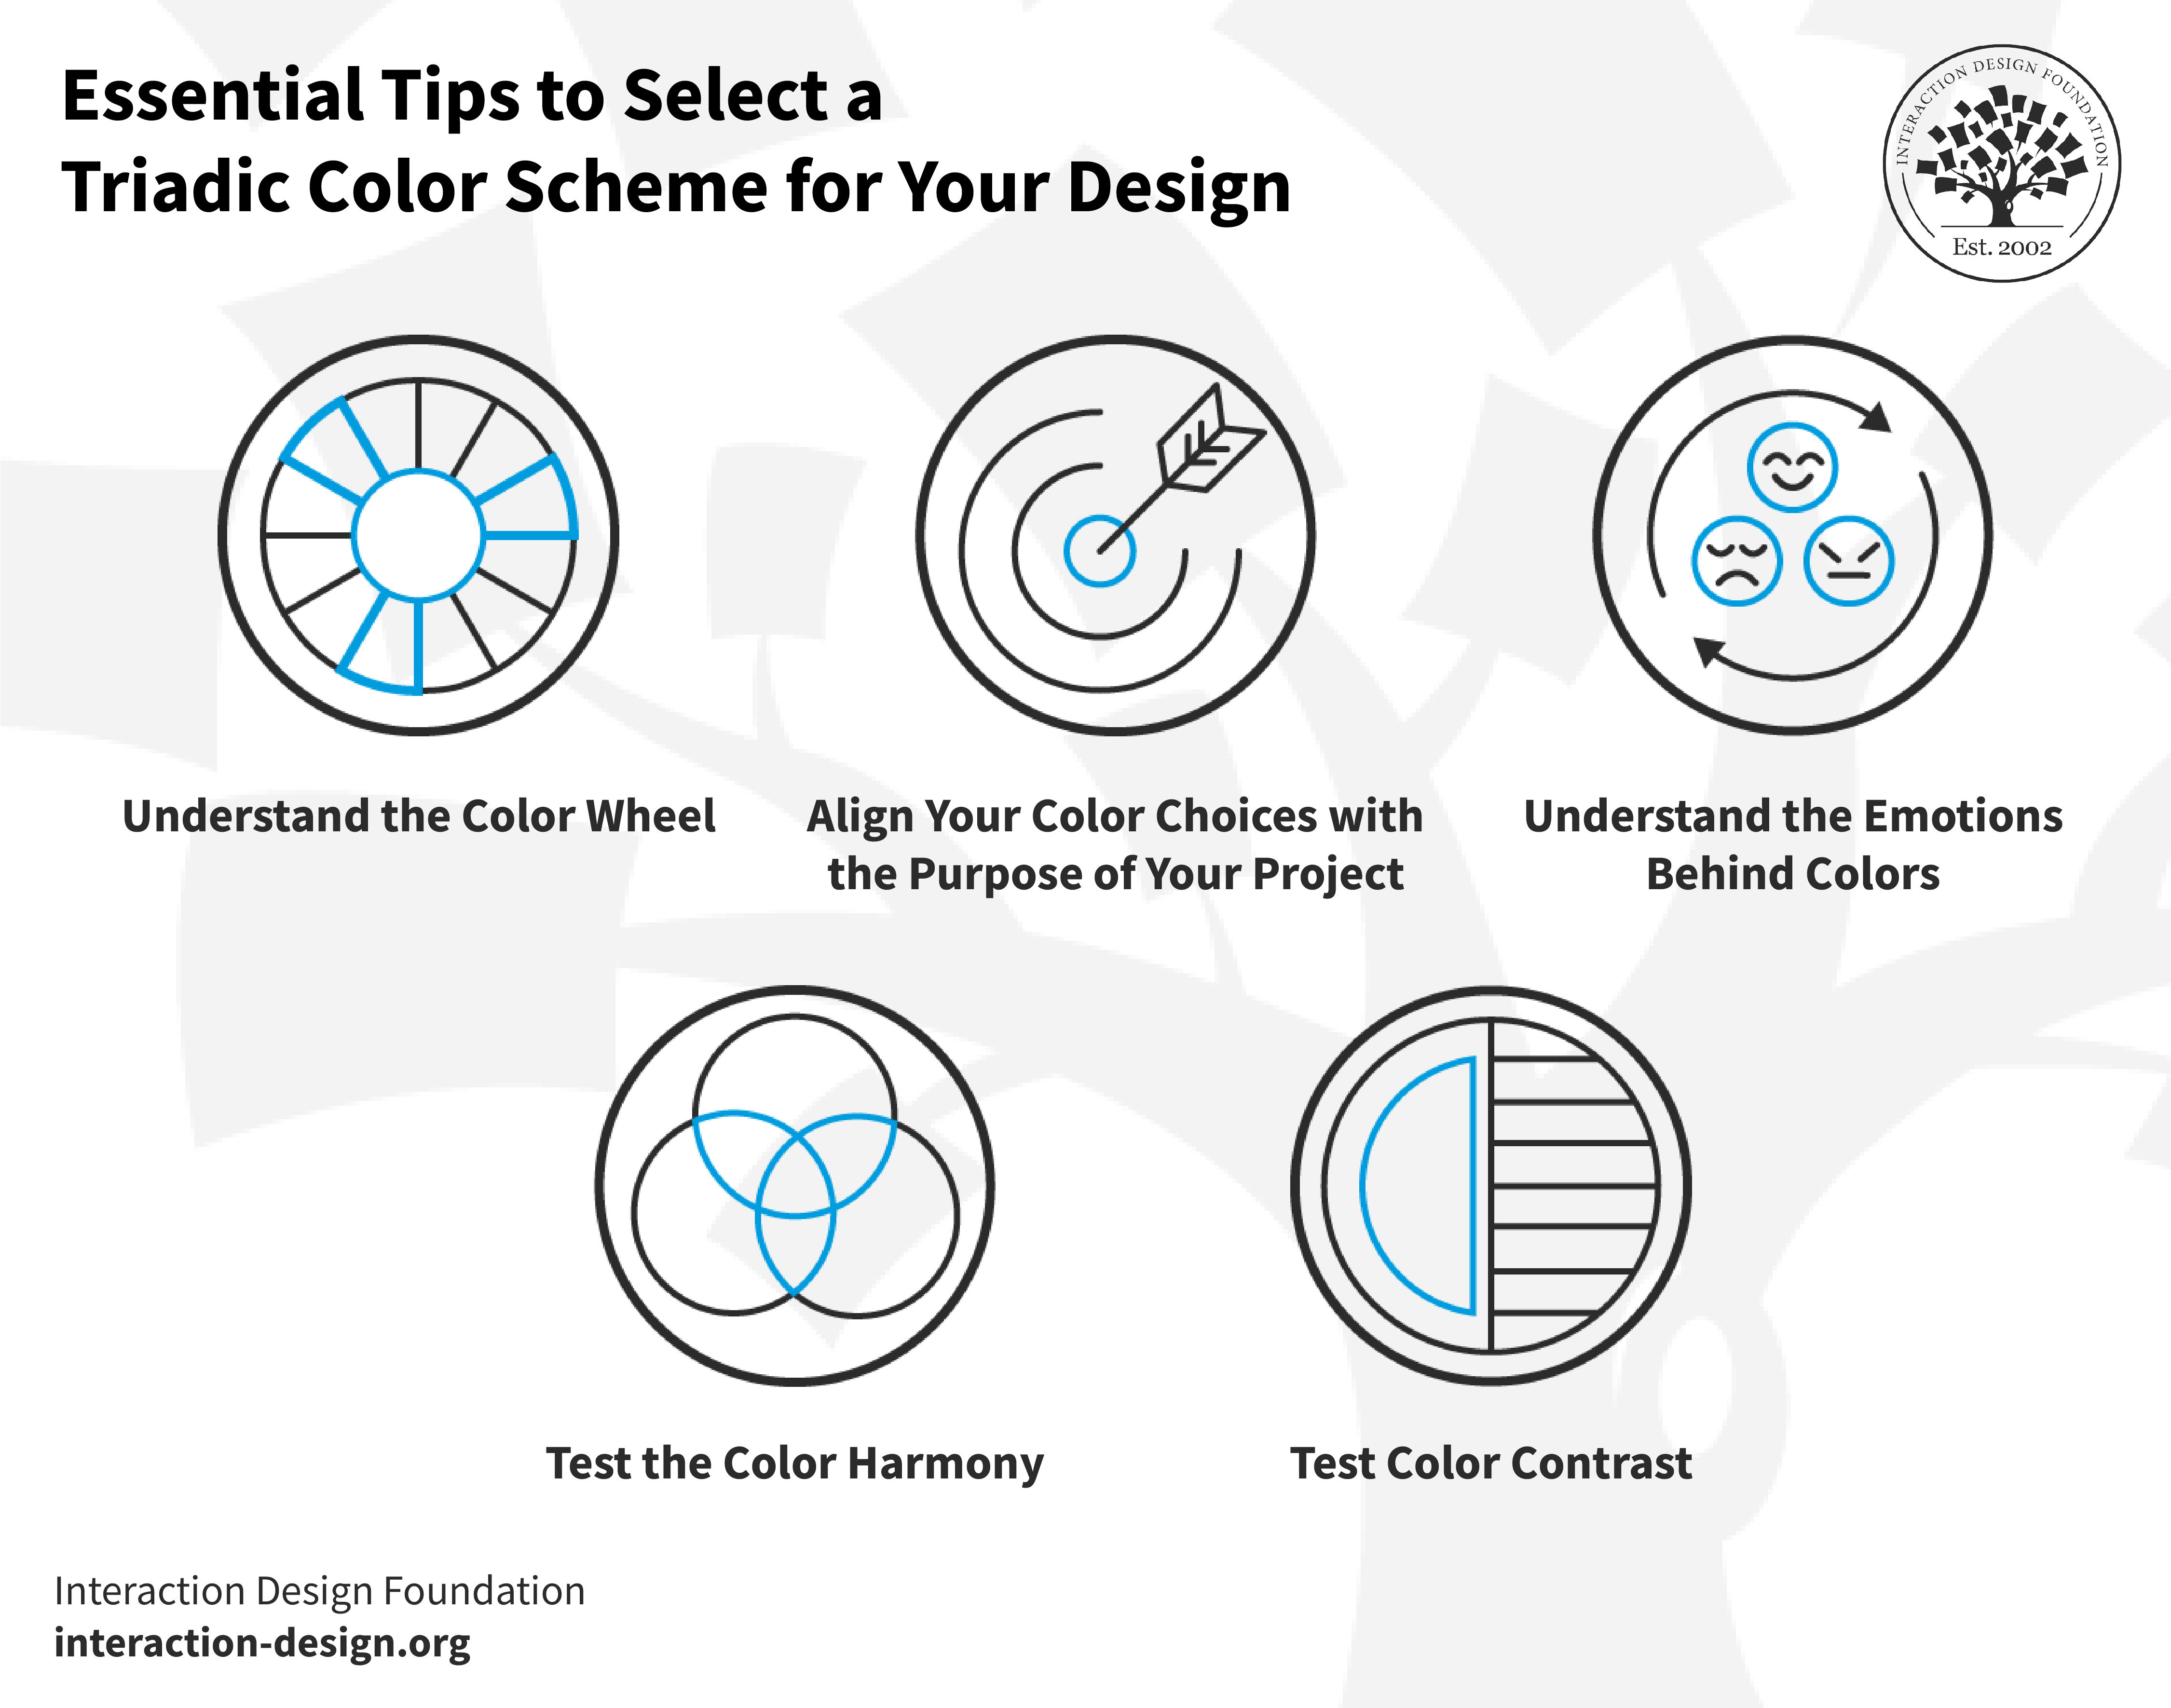 Five essential tips to select a triadic color scheme for your design.